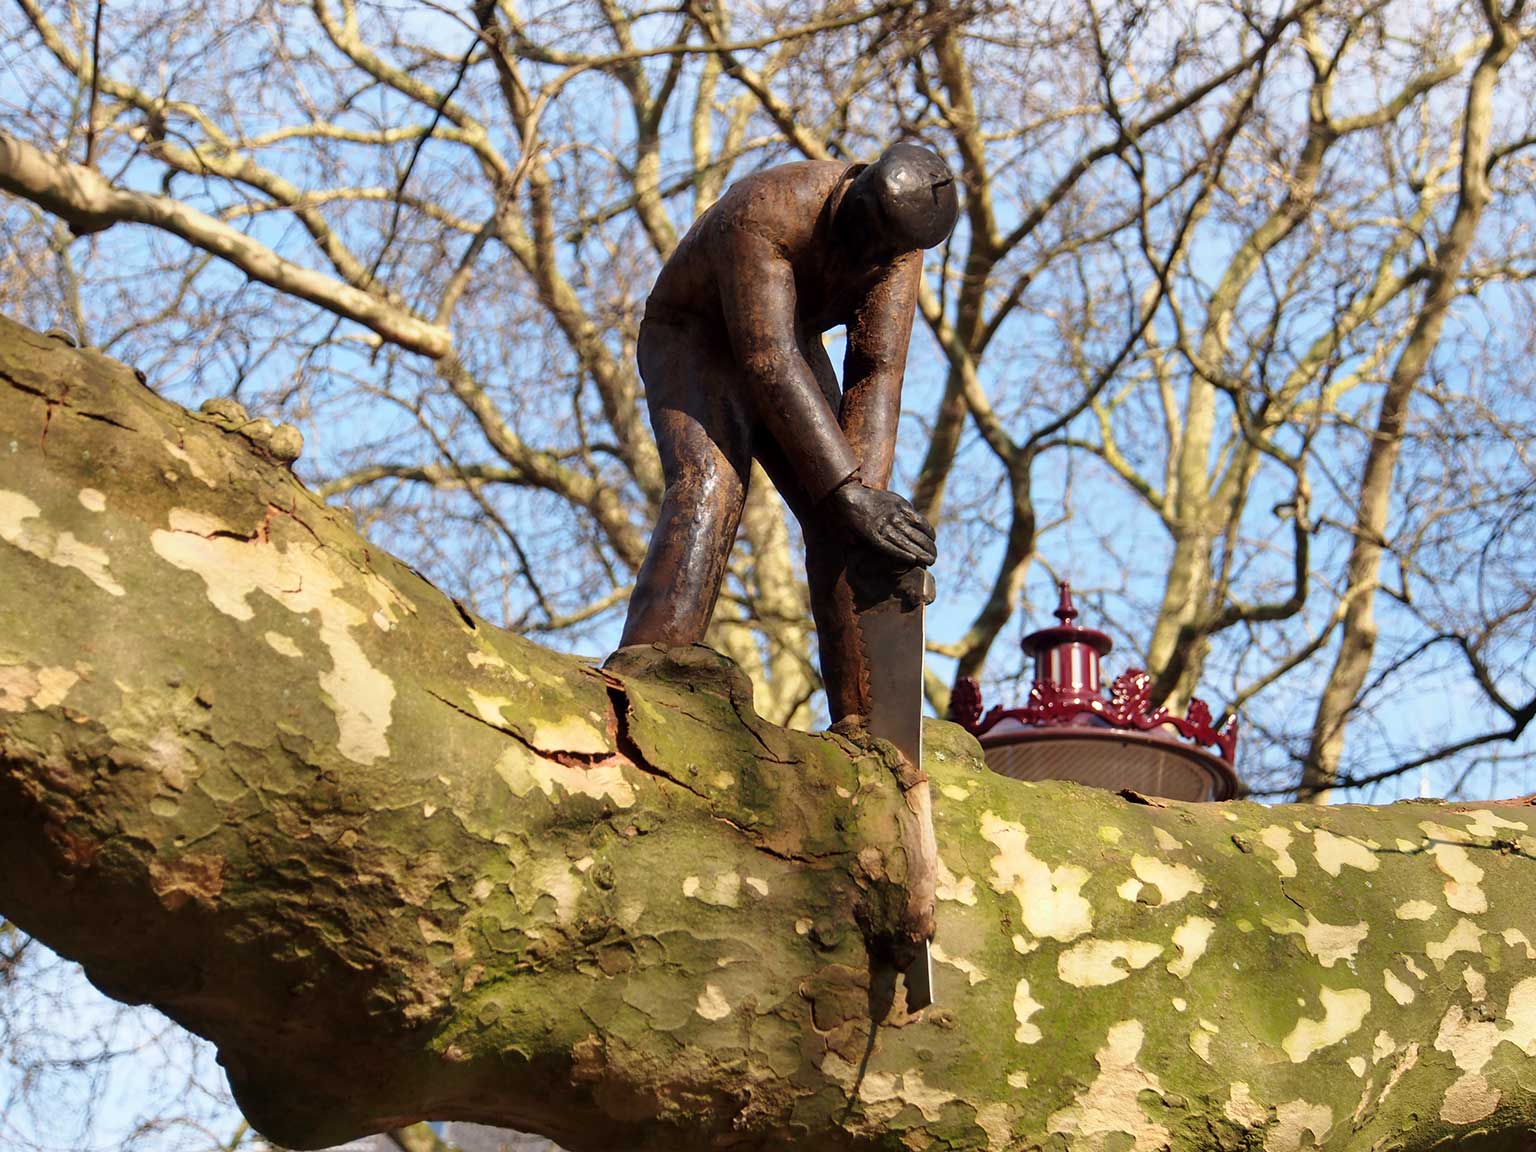 Statue The Little Sawer in March 2018, Amsterdam